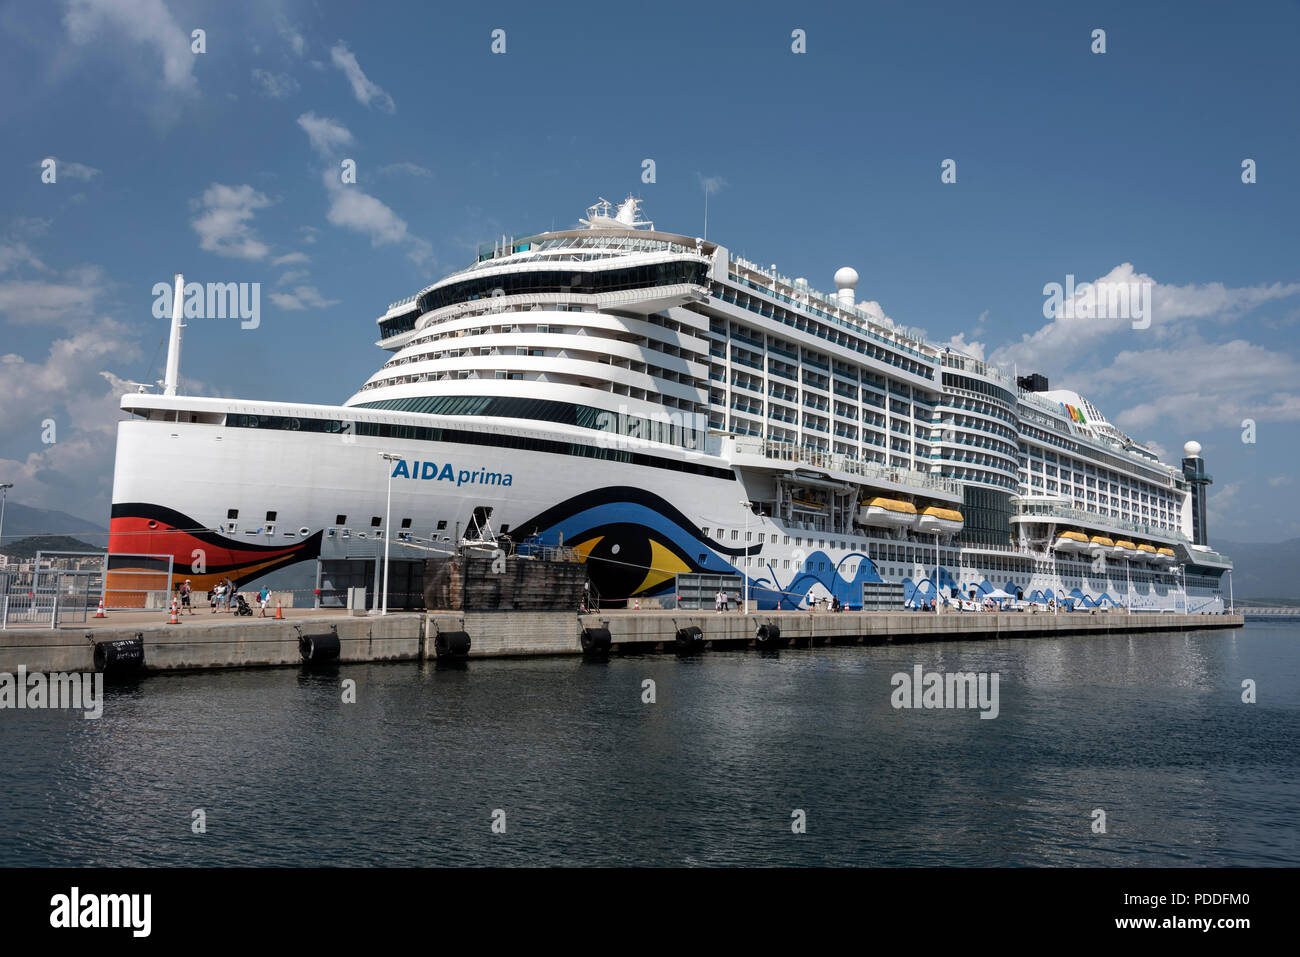 The AIDA prima cruise ship built by Mitsubishi Heavy Industries (MHI)in Japan for the German cruise operator AIDA Cruises in dock at Ajaccio port in A Stock Photo